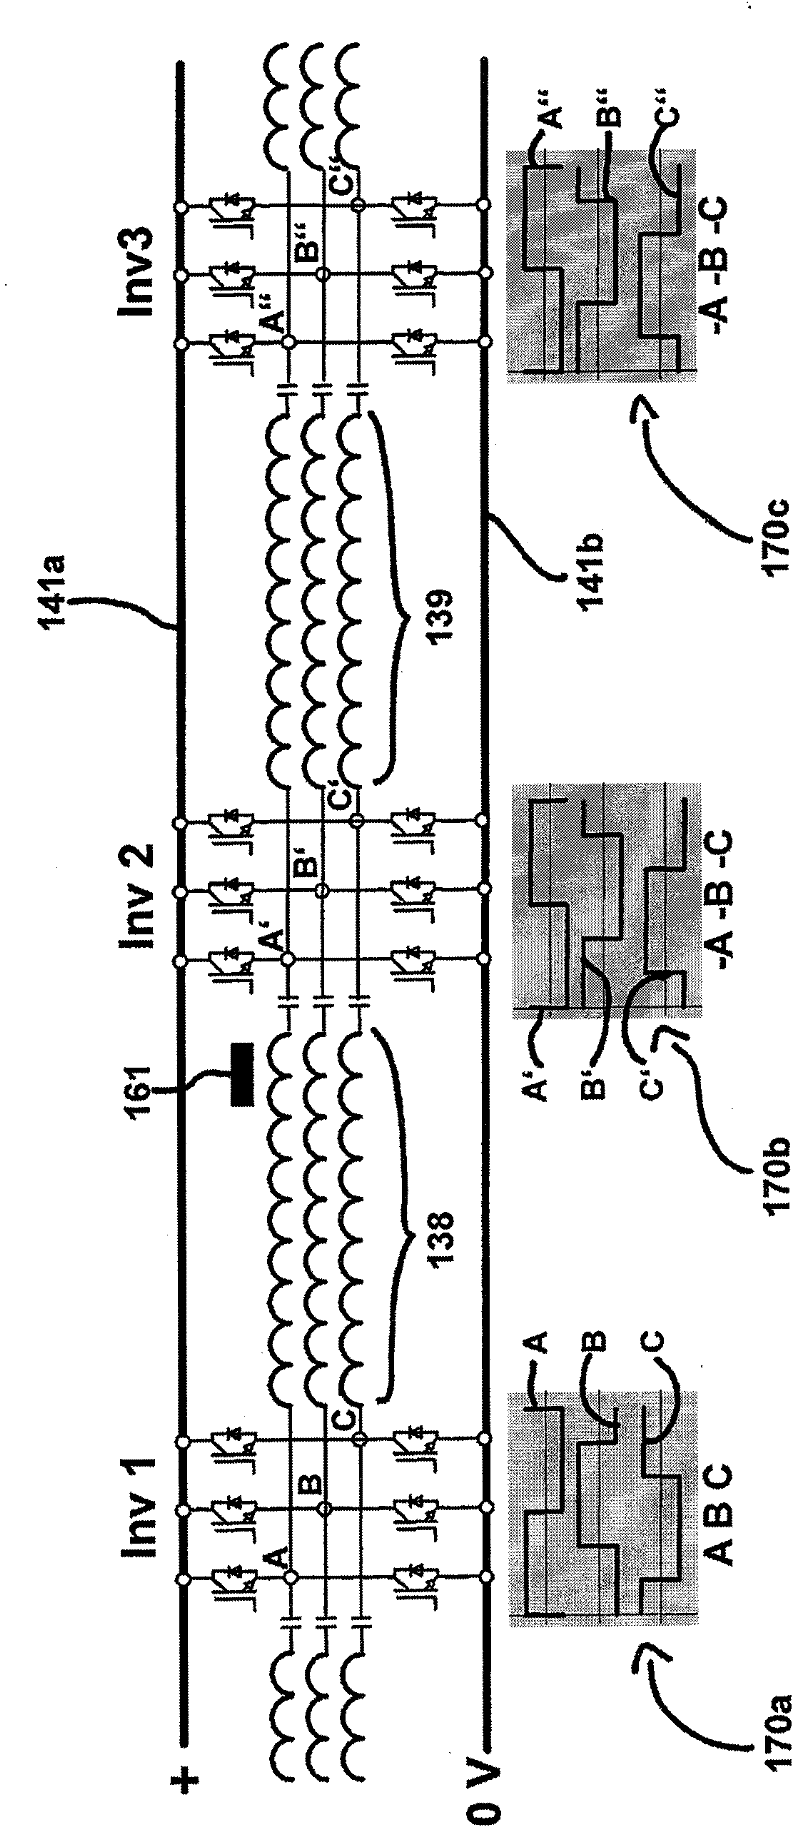 Producing electromagnetic fields for transferring electric energy to a vehicle